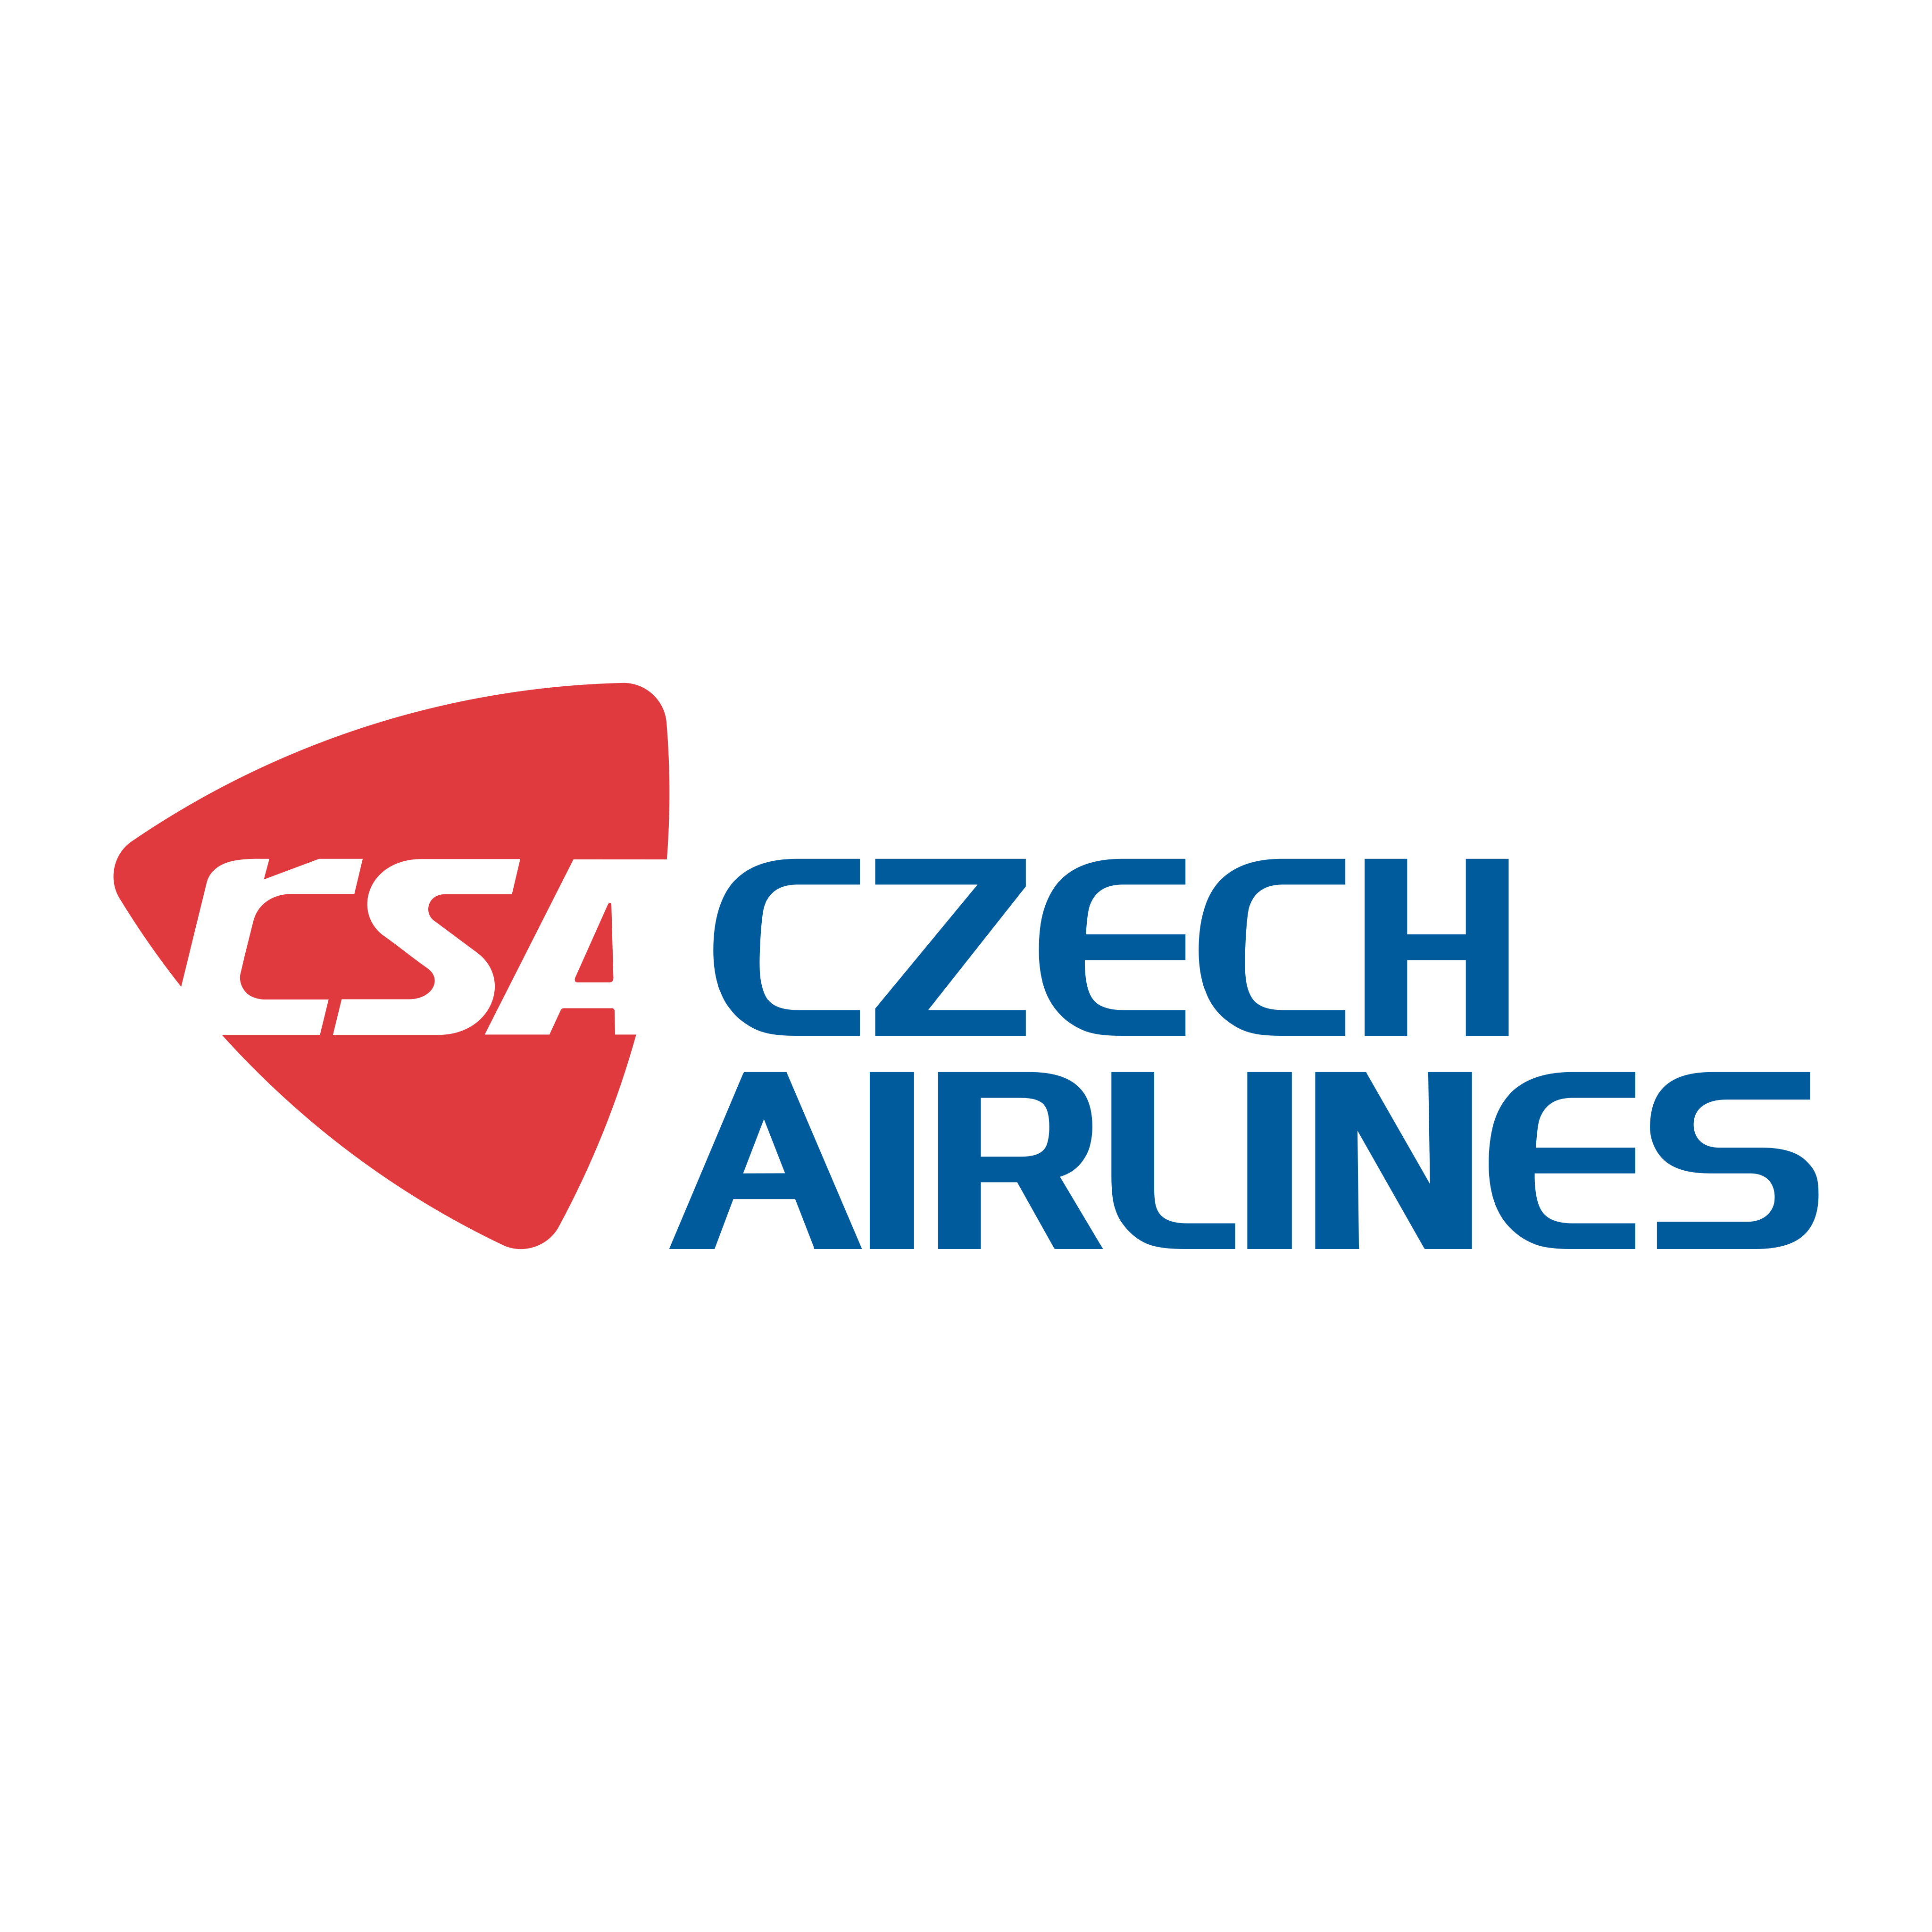 Czech Airlines Logo PNG.